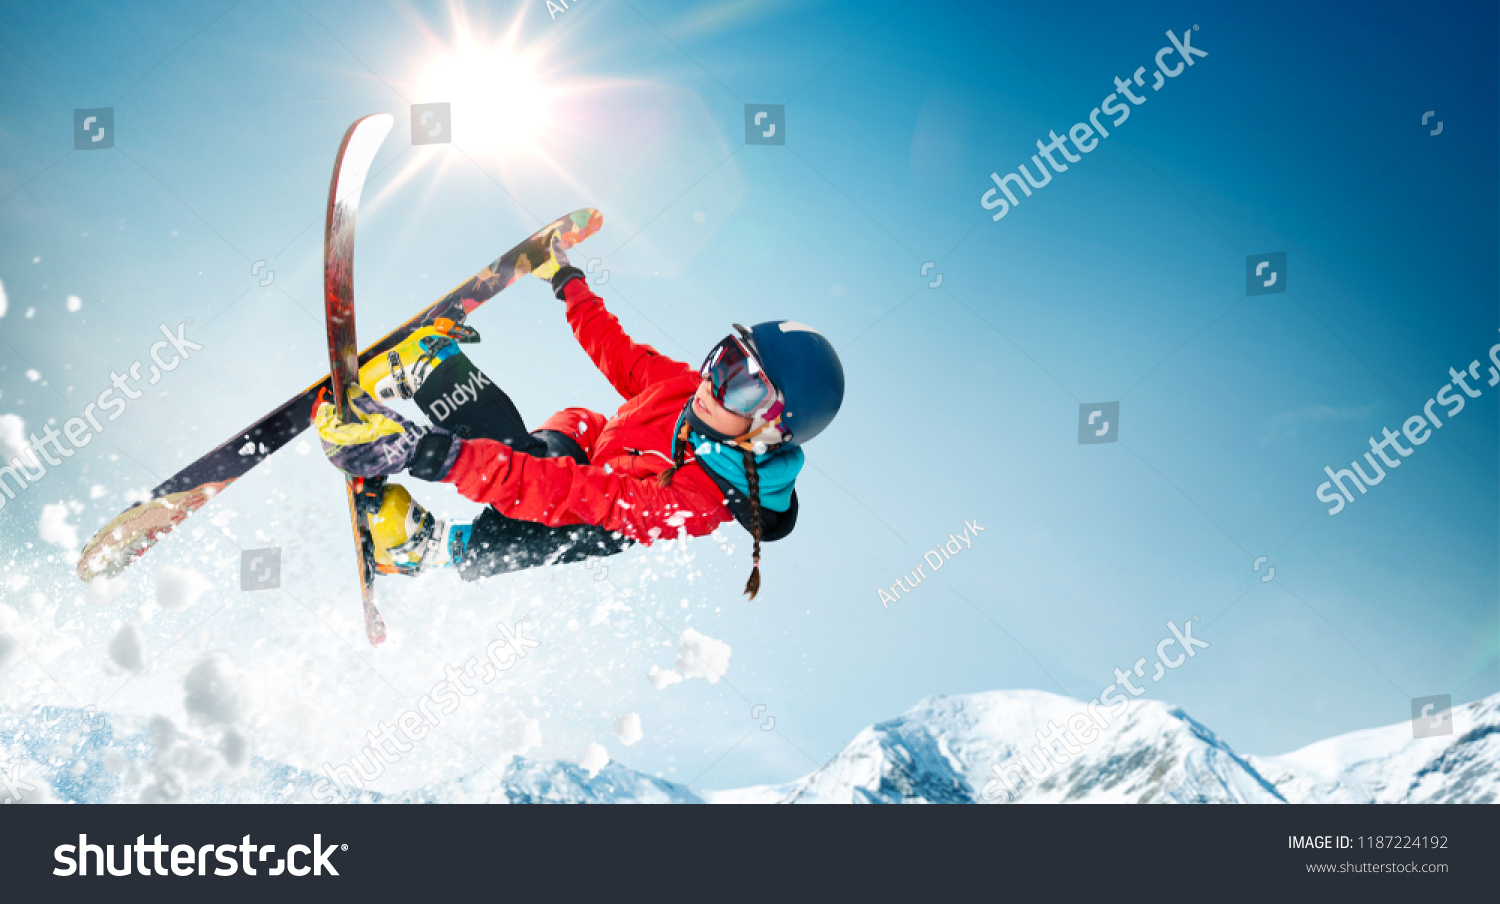 Skiing. Jumping skier. Extreme winter sports. #1187224192